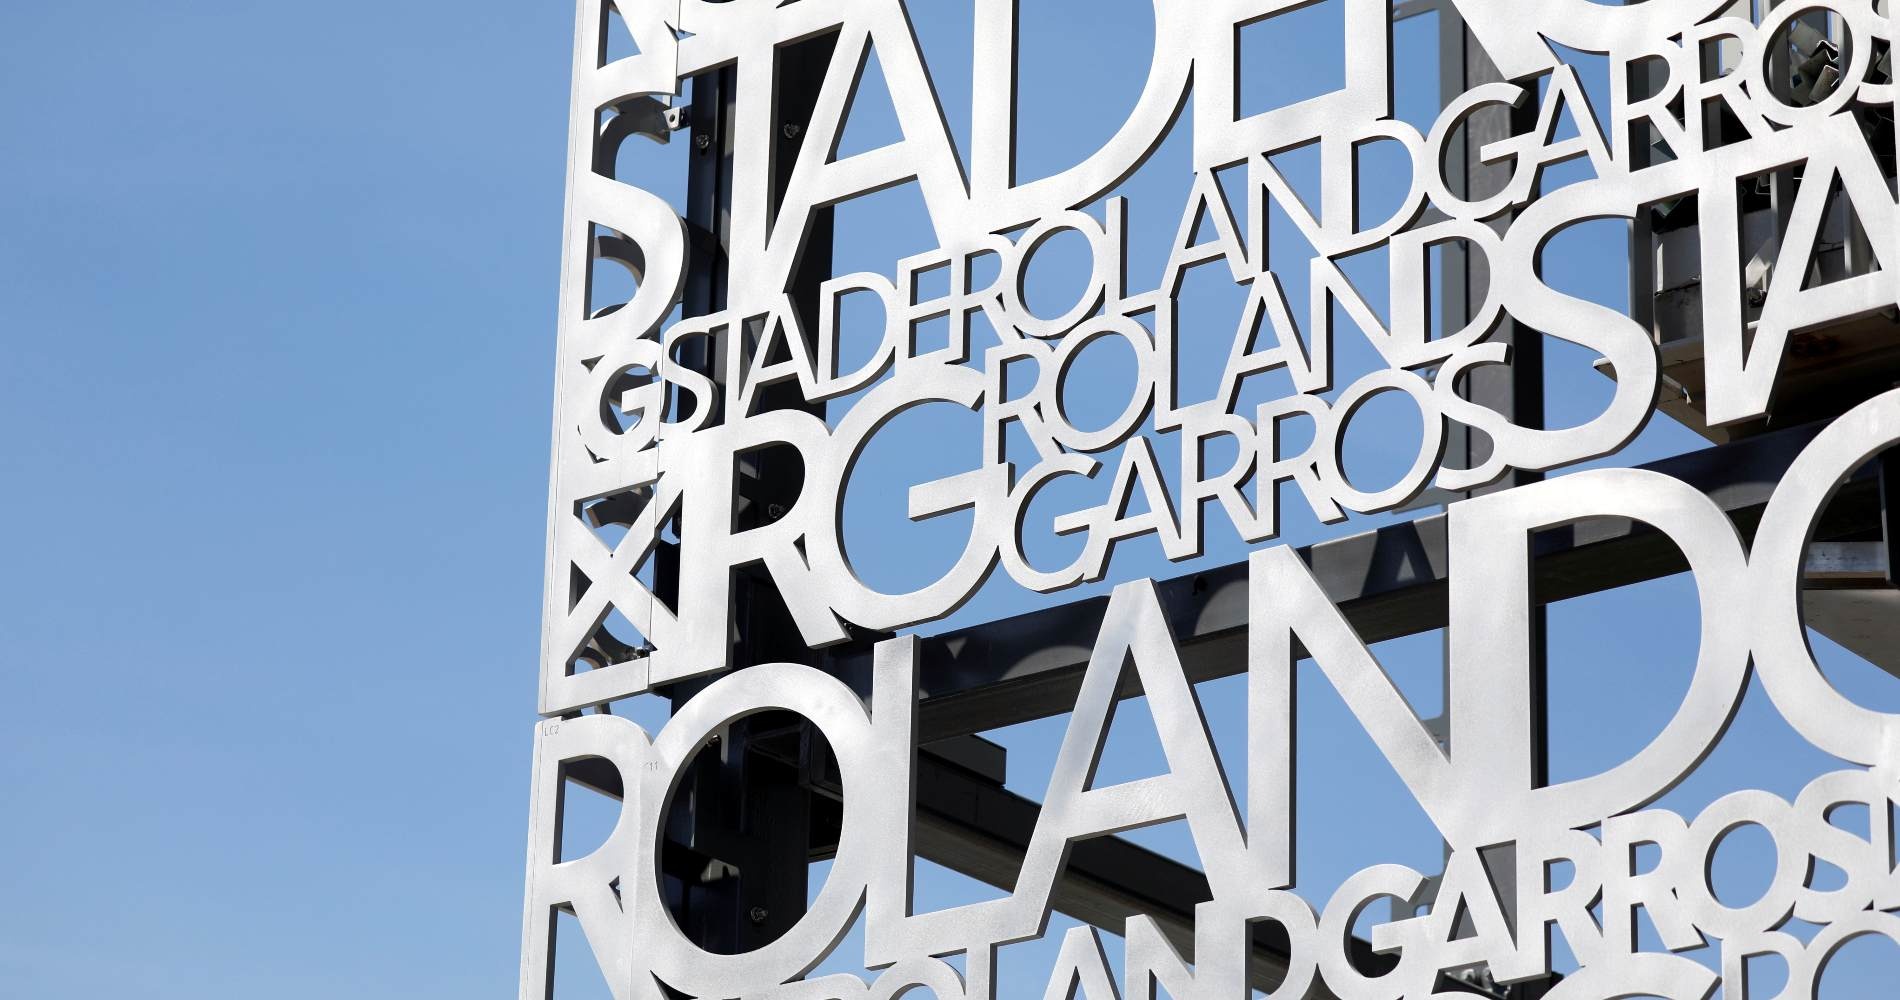 The site of Roland-Garros has been renovated during the last couple of years